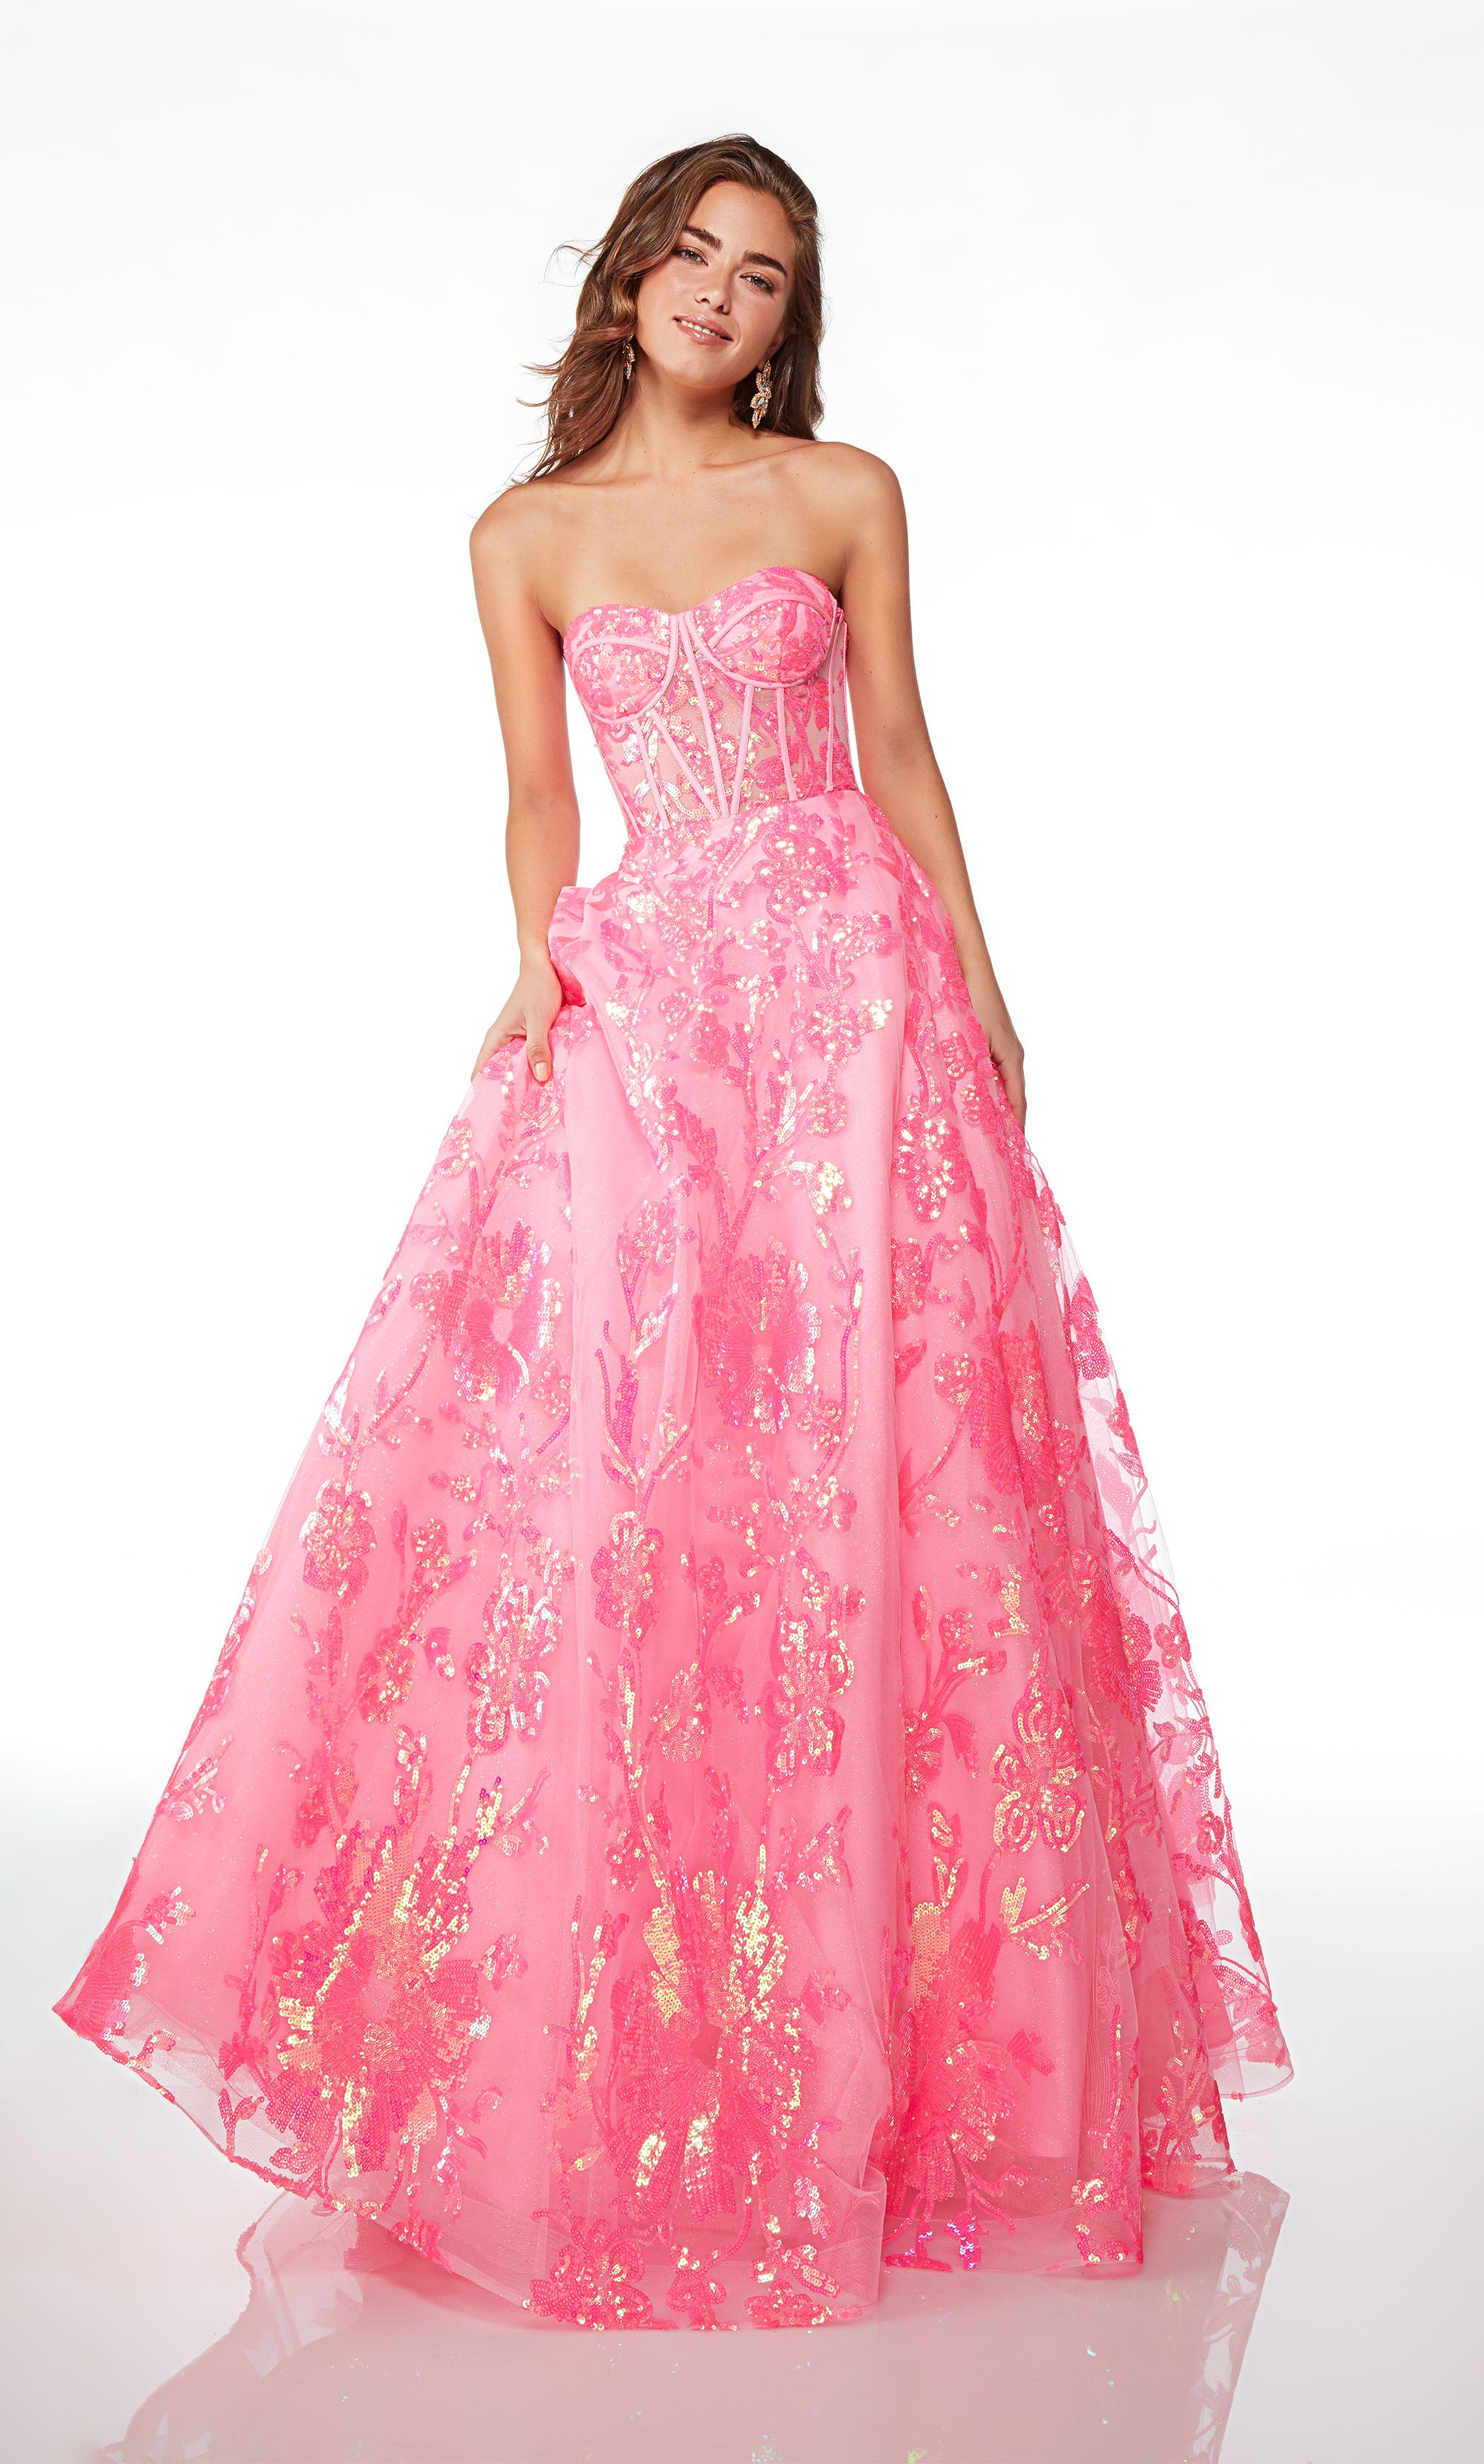 Formal Dress: 61515. Long, Strapless, Ballgown, Lace-up Back